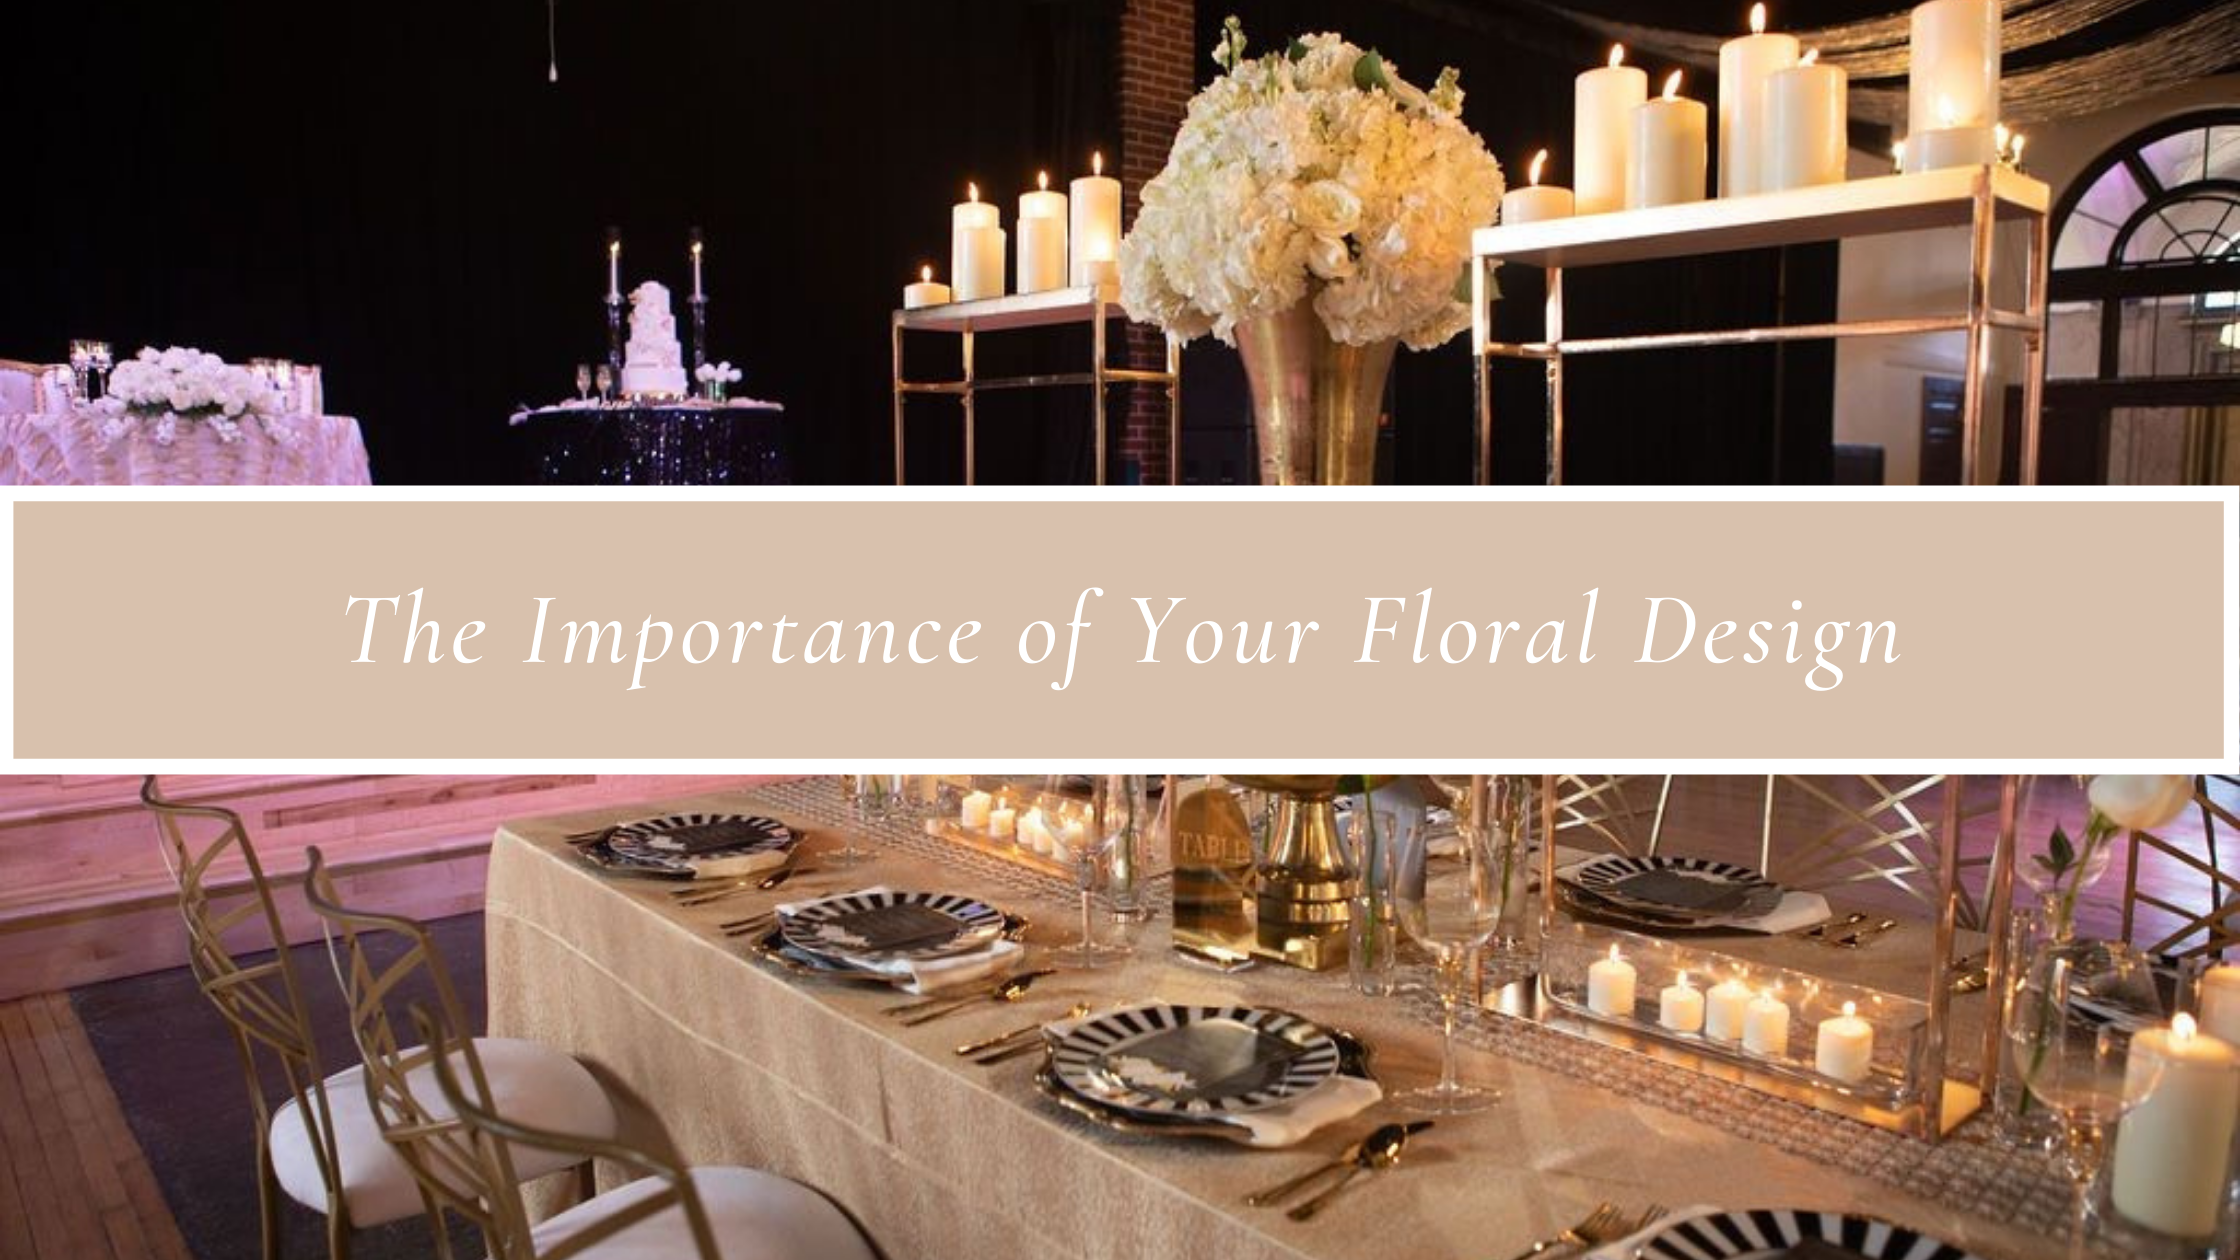 The Importance of Your Floral Design